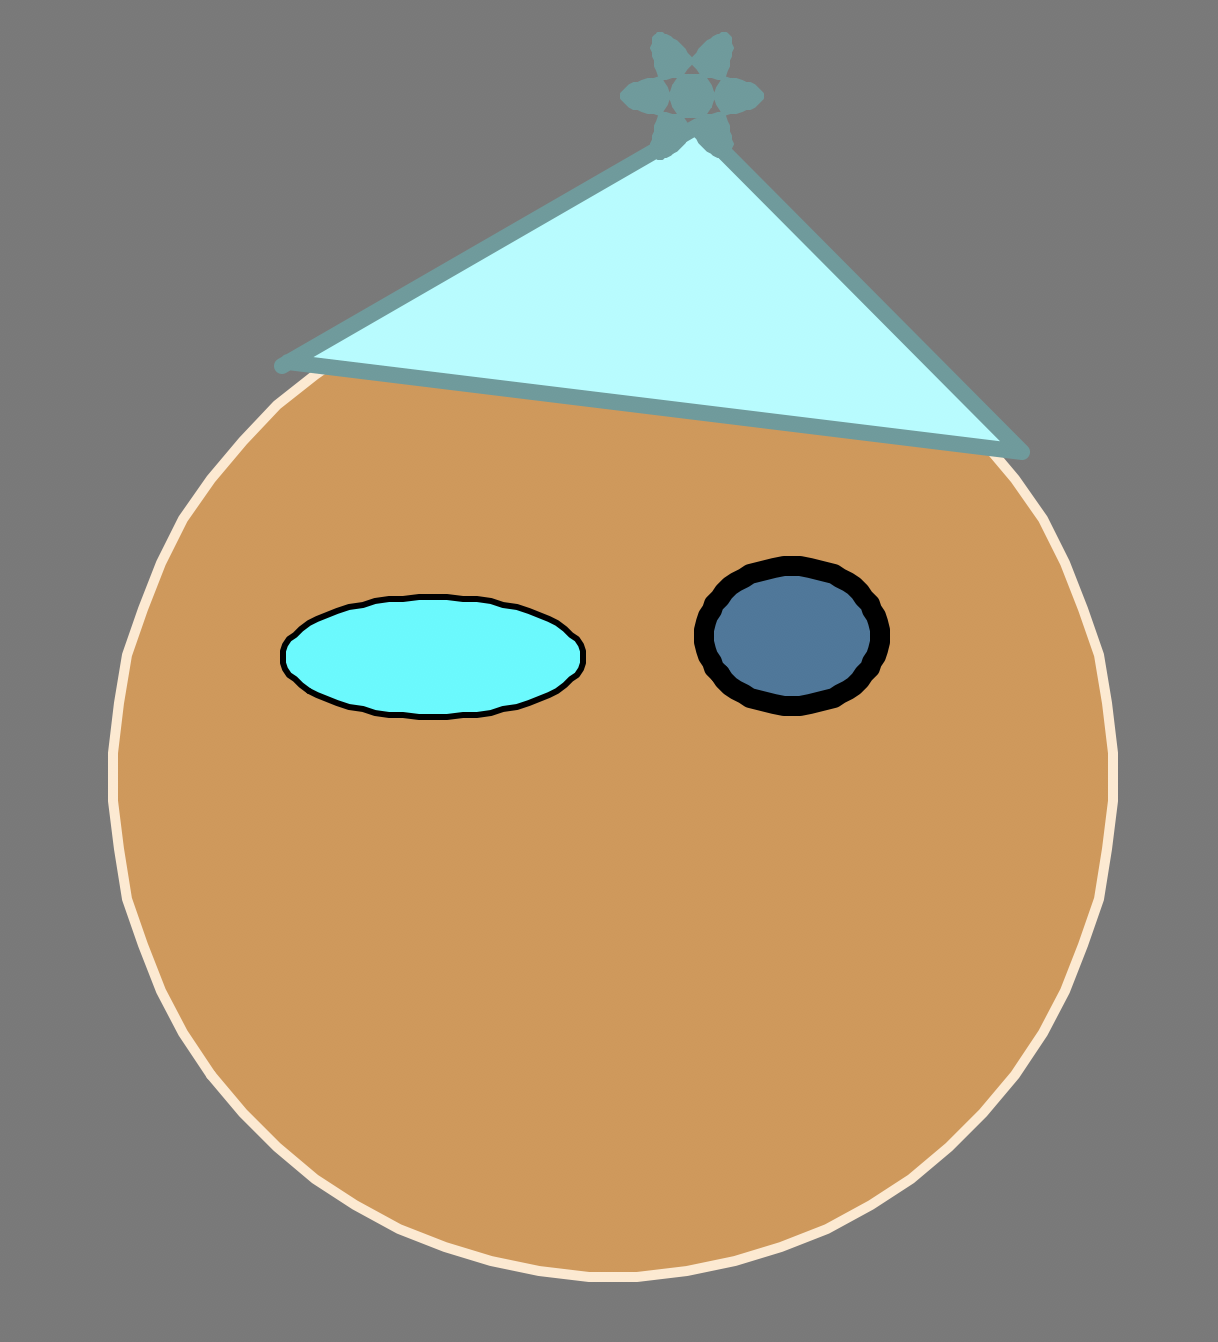 Smiley Hat 3: The same brown circle face with a triangular hat that has three ellipses on top to make a pom pom.